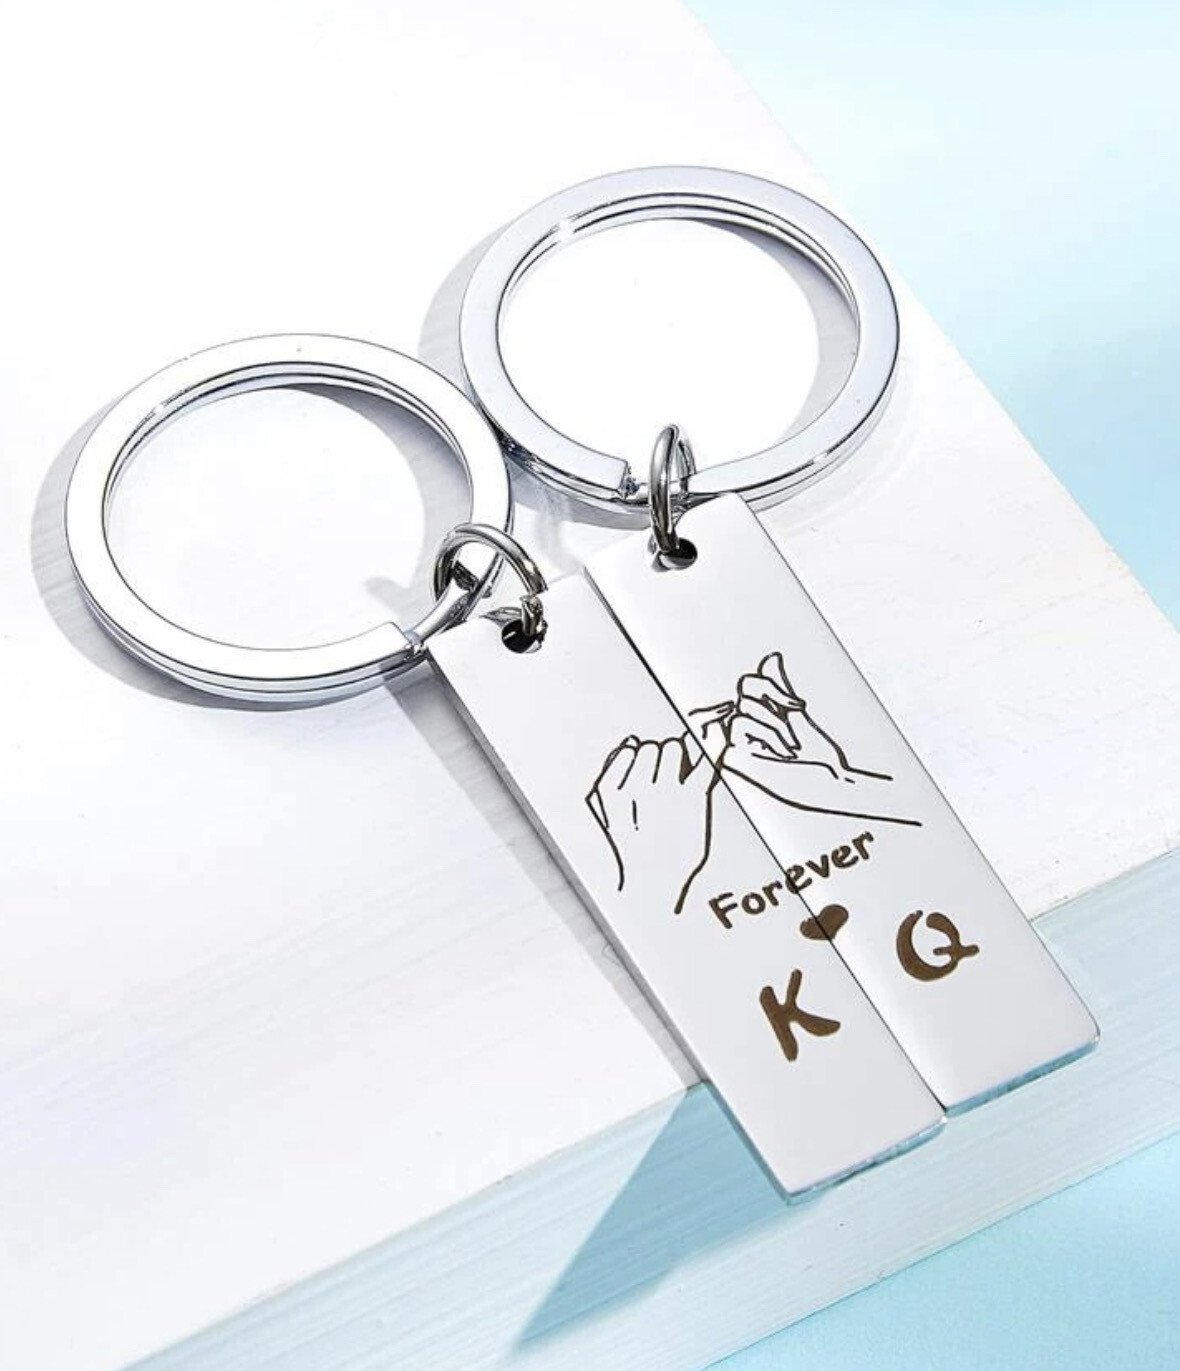 King And Queen Key Chain